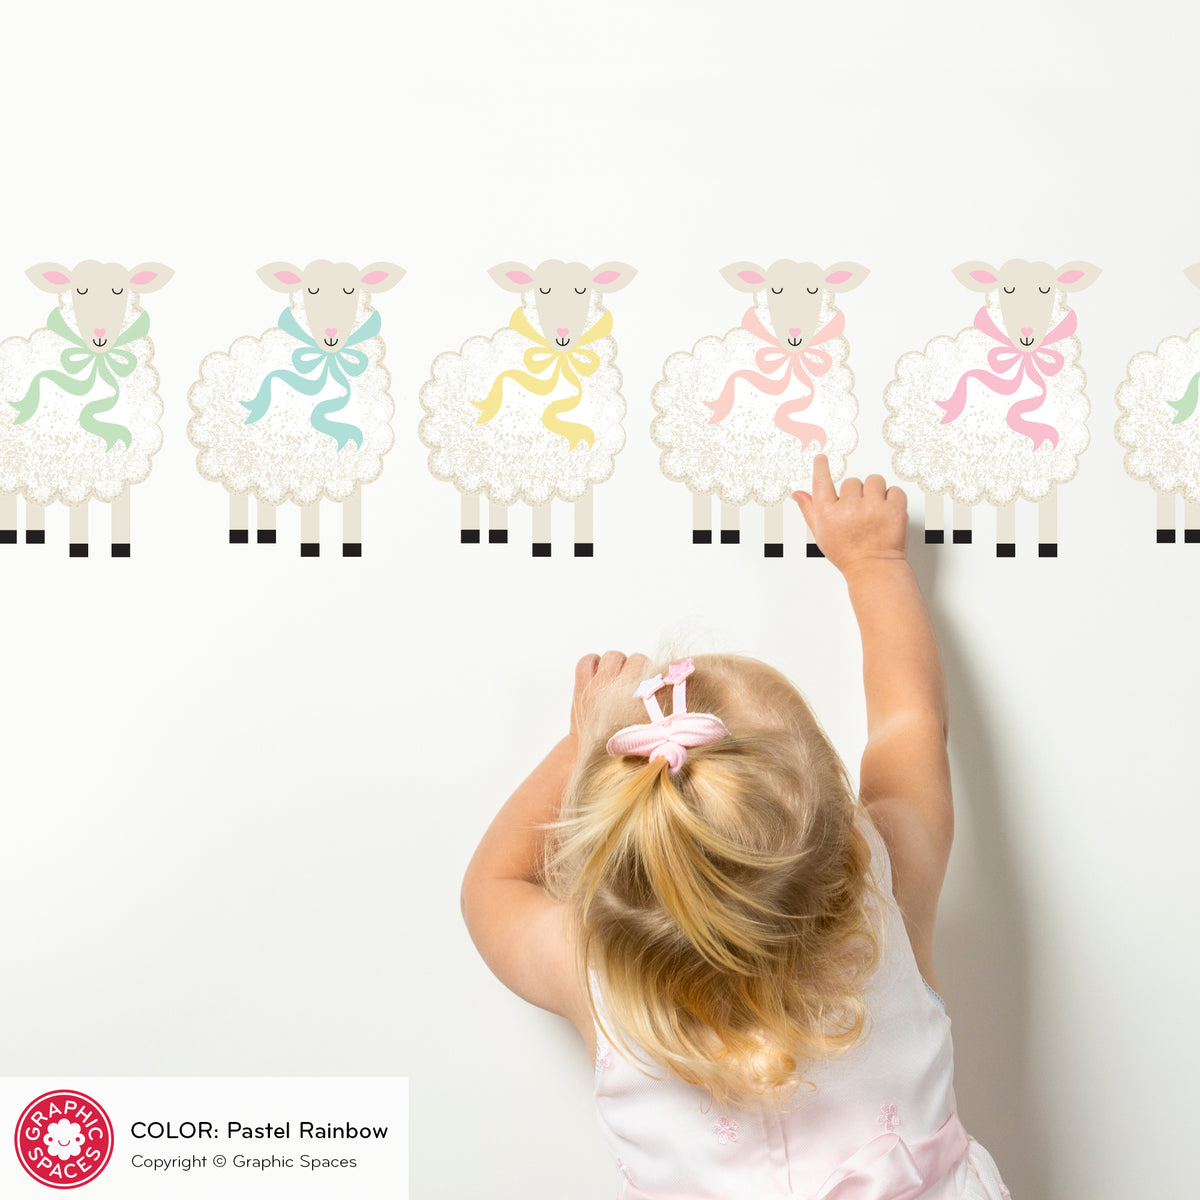 Sheep Scatter Fabric Wall Decals, Pack of 15 - PASTEL RAINBOW